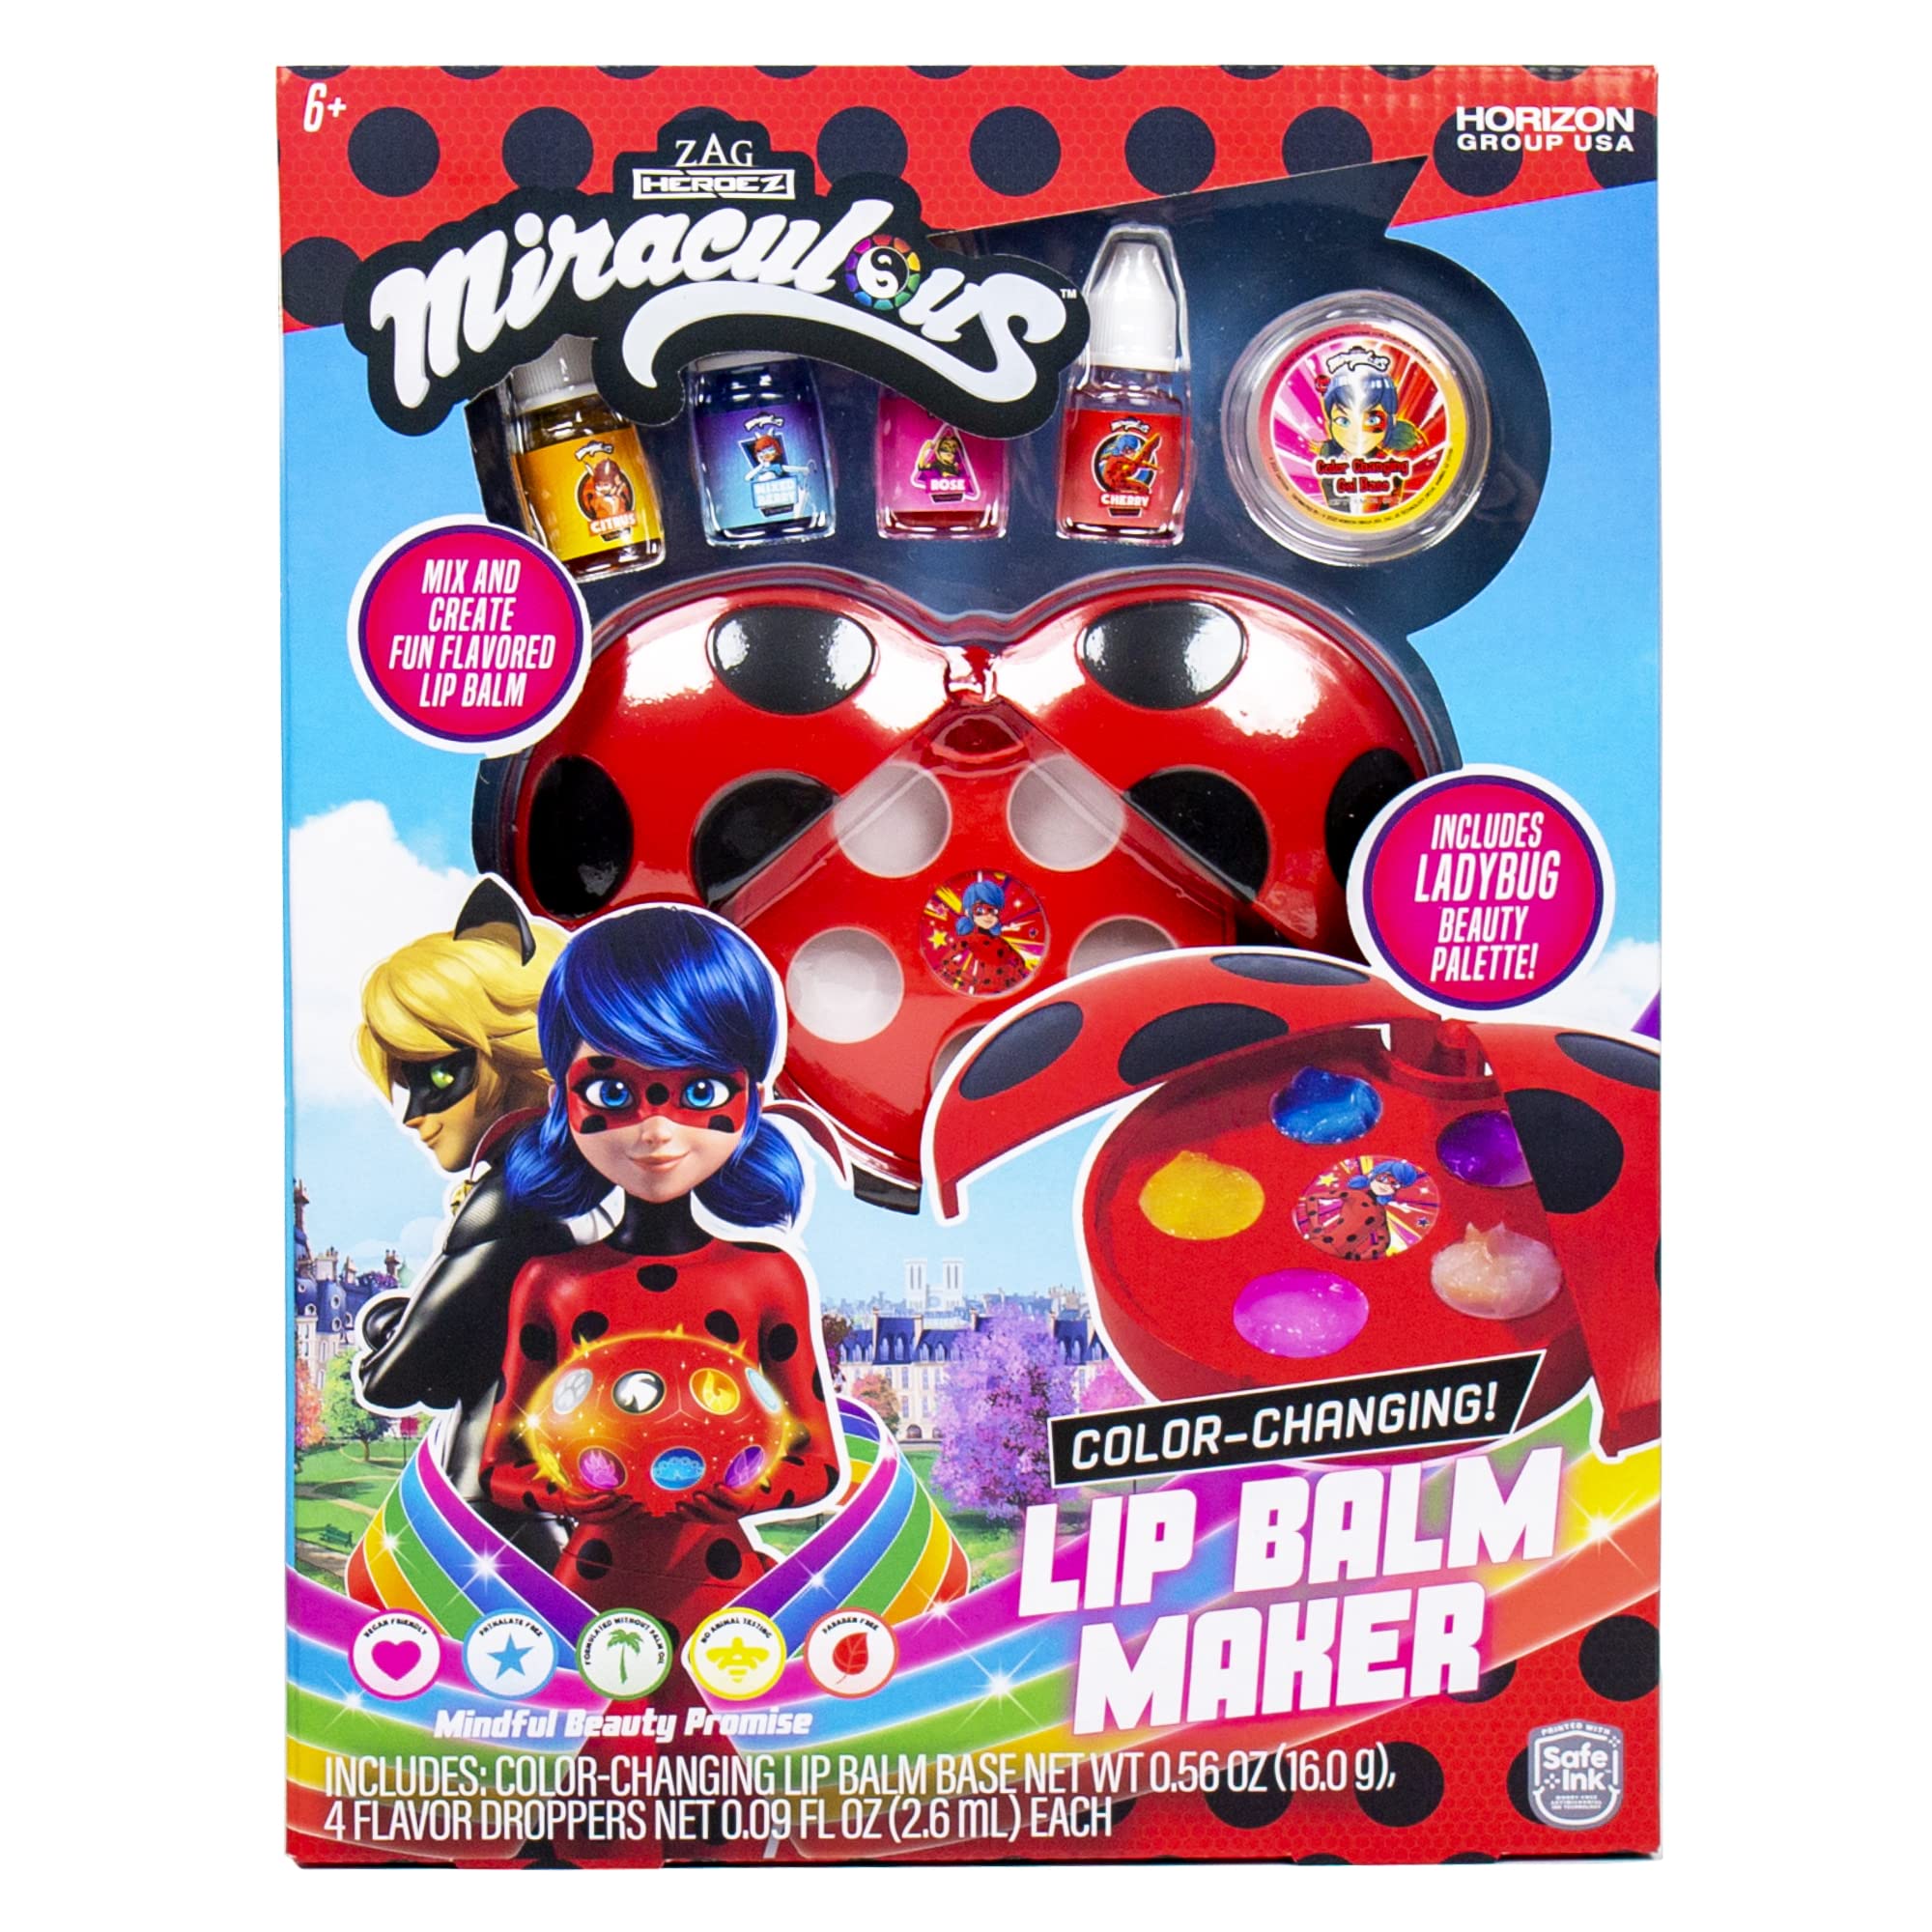 Miraculous Color-Changing Lip Balm Maker, Make Your Own Ladybug Lip Gloss Kit, Travel-Friendly Lip Balm Palette Great for Miraculous Parties & Group Activities, Perfect for Kids Ages 6, 7, 8, 9, 10